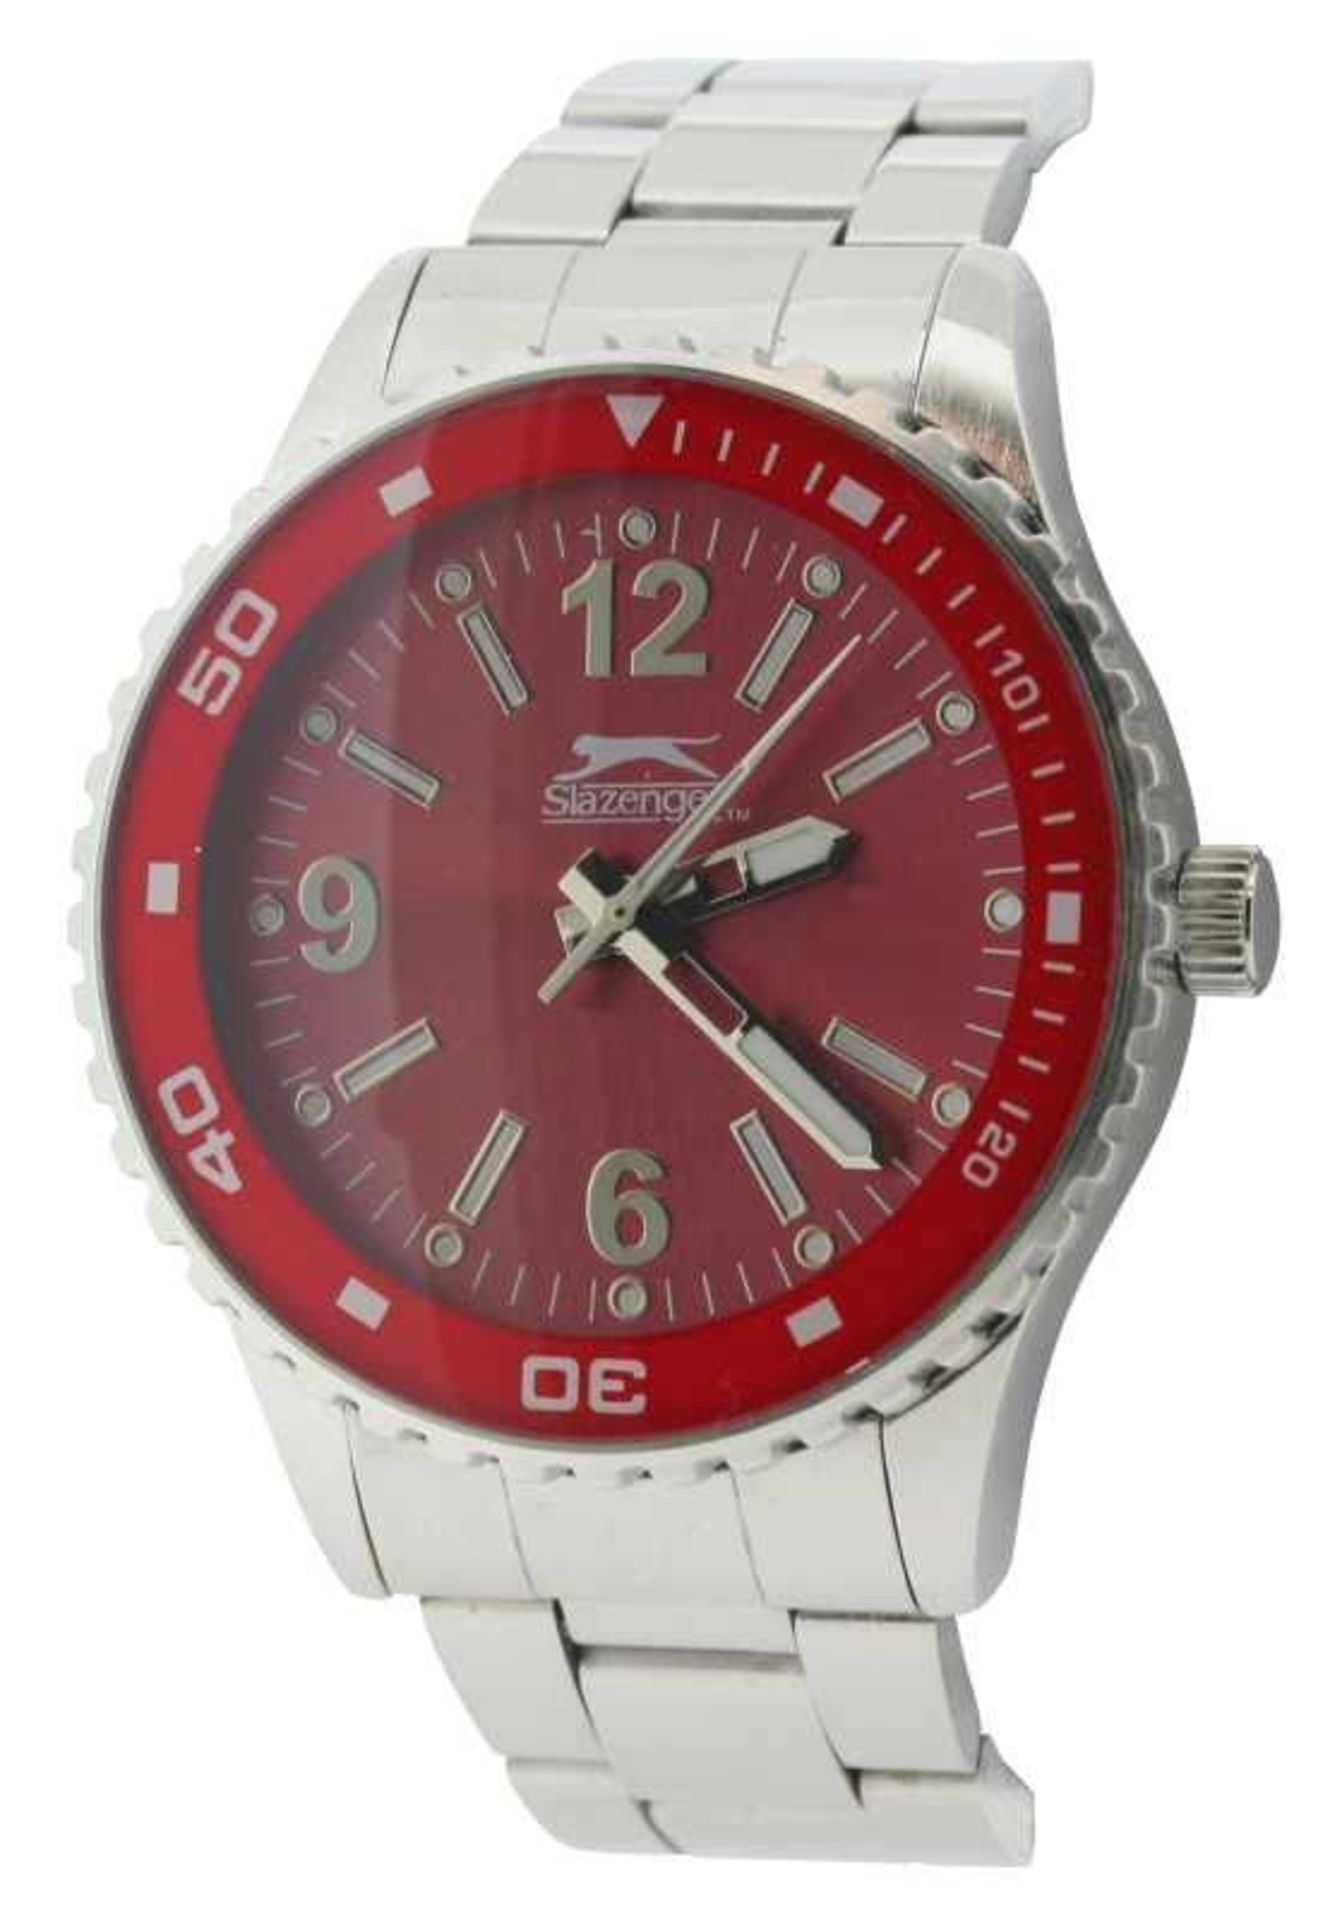 V Brand New Gents Slazenger Sports/Dress Watch With Red Dial And Chrome Bracelet Strap